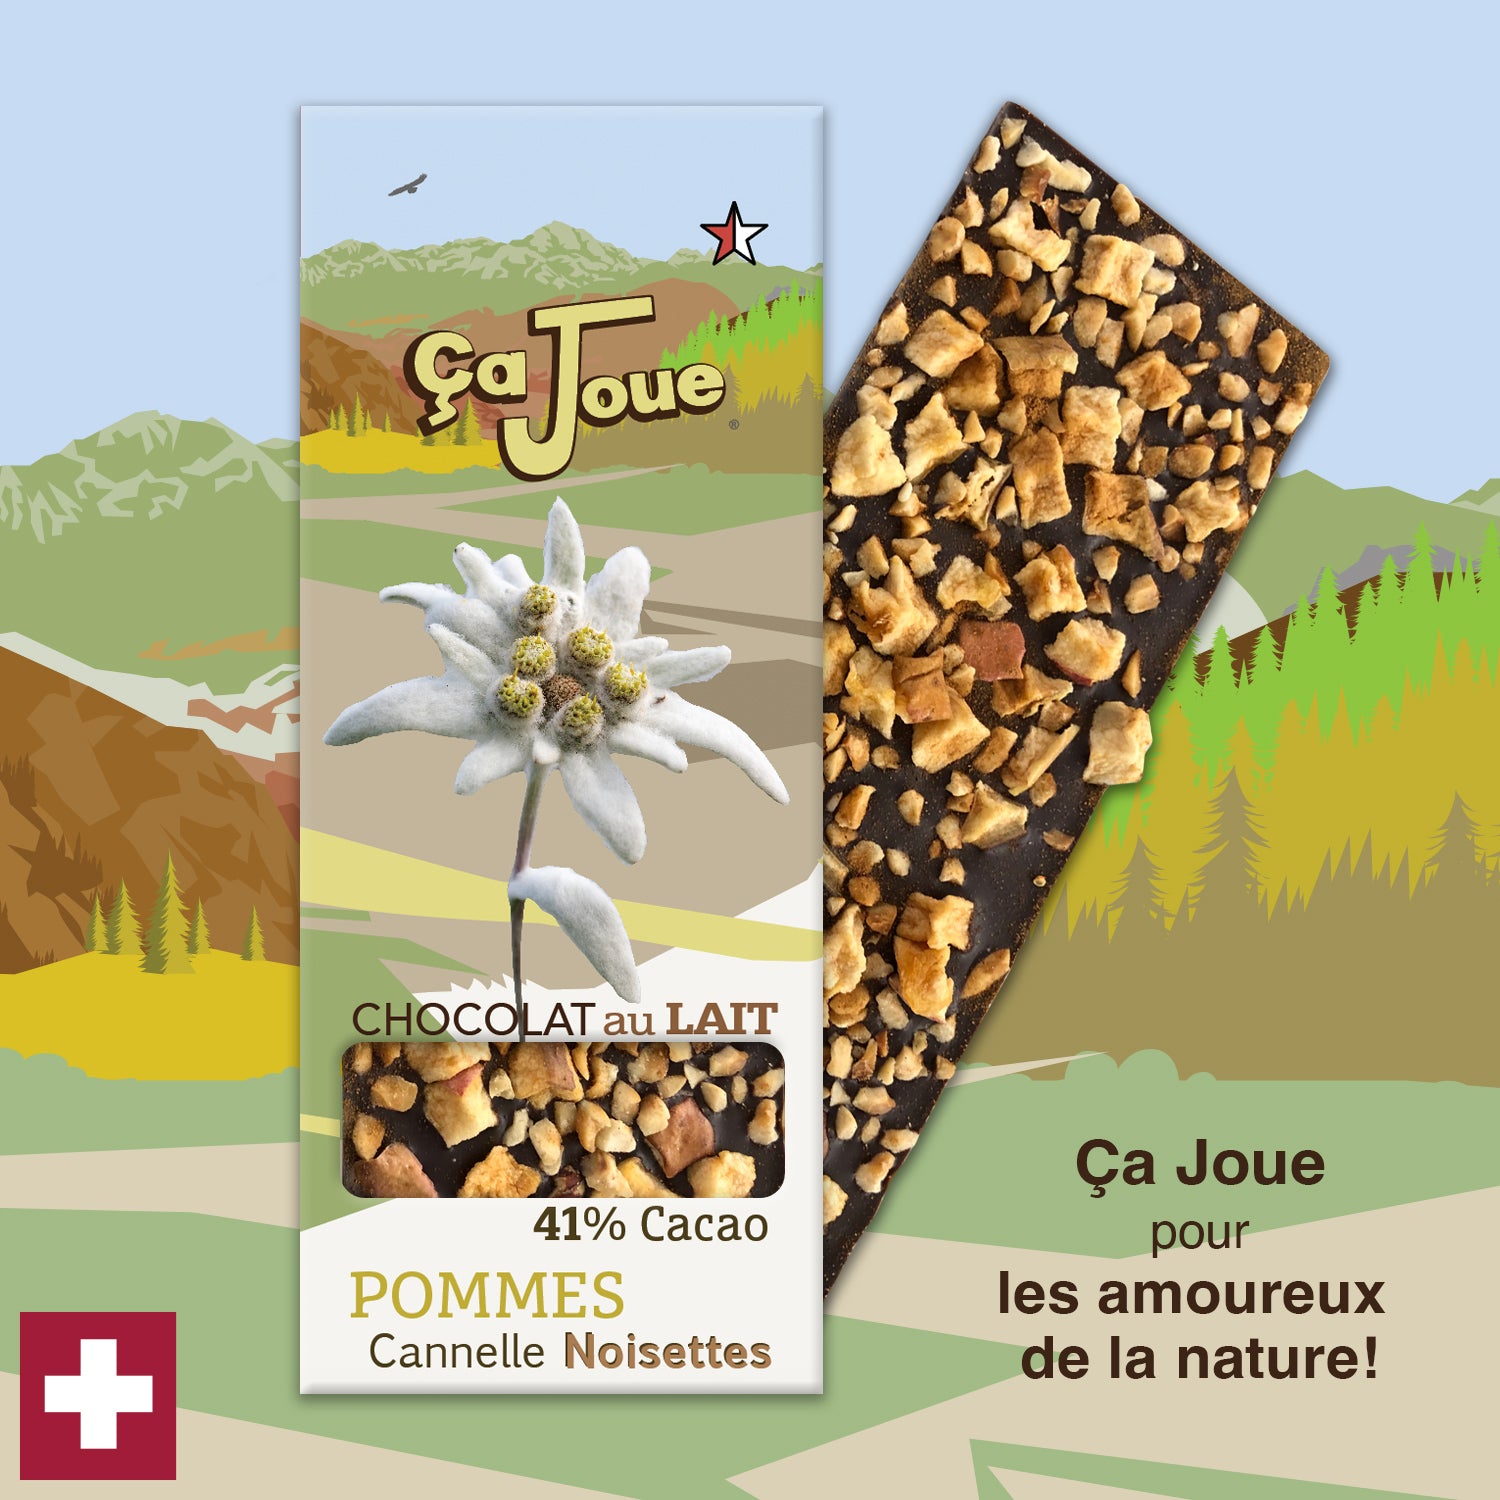 Ça Joue for the Edelweiss (Ref-BL4) Milk Chocolate from Val de Bagnes